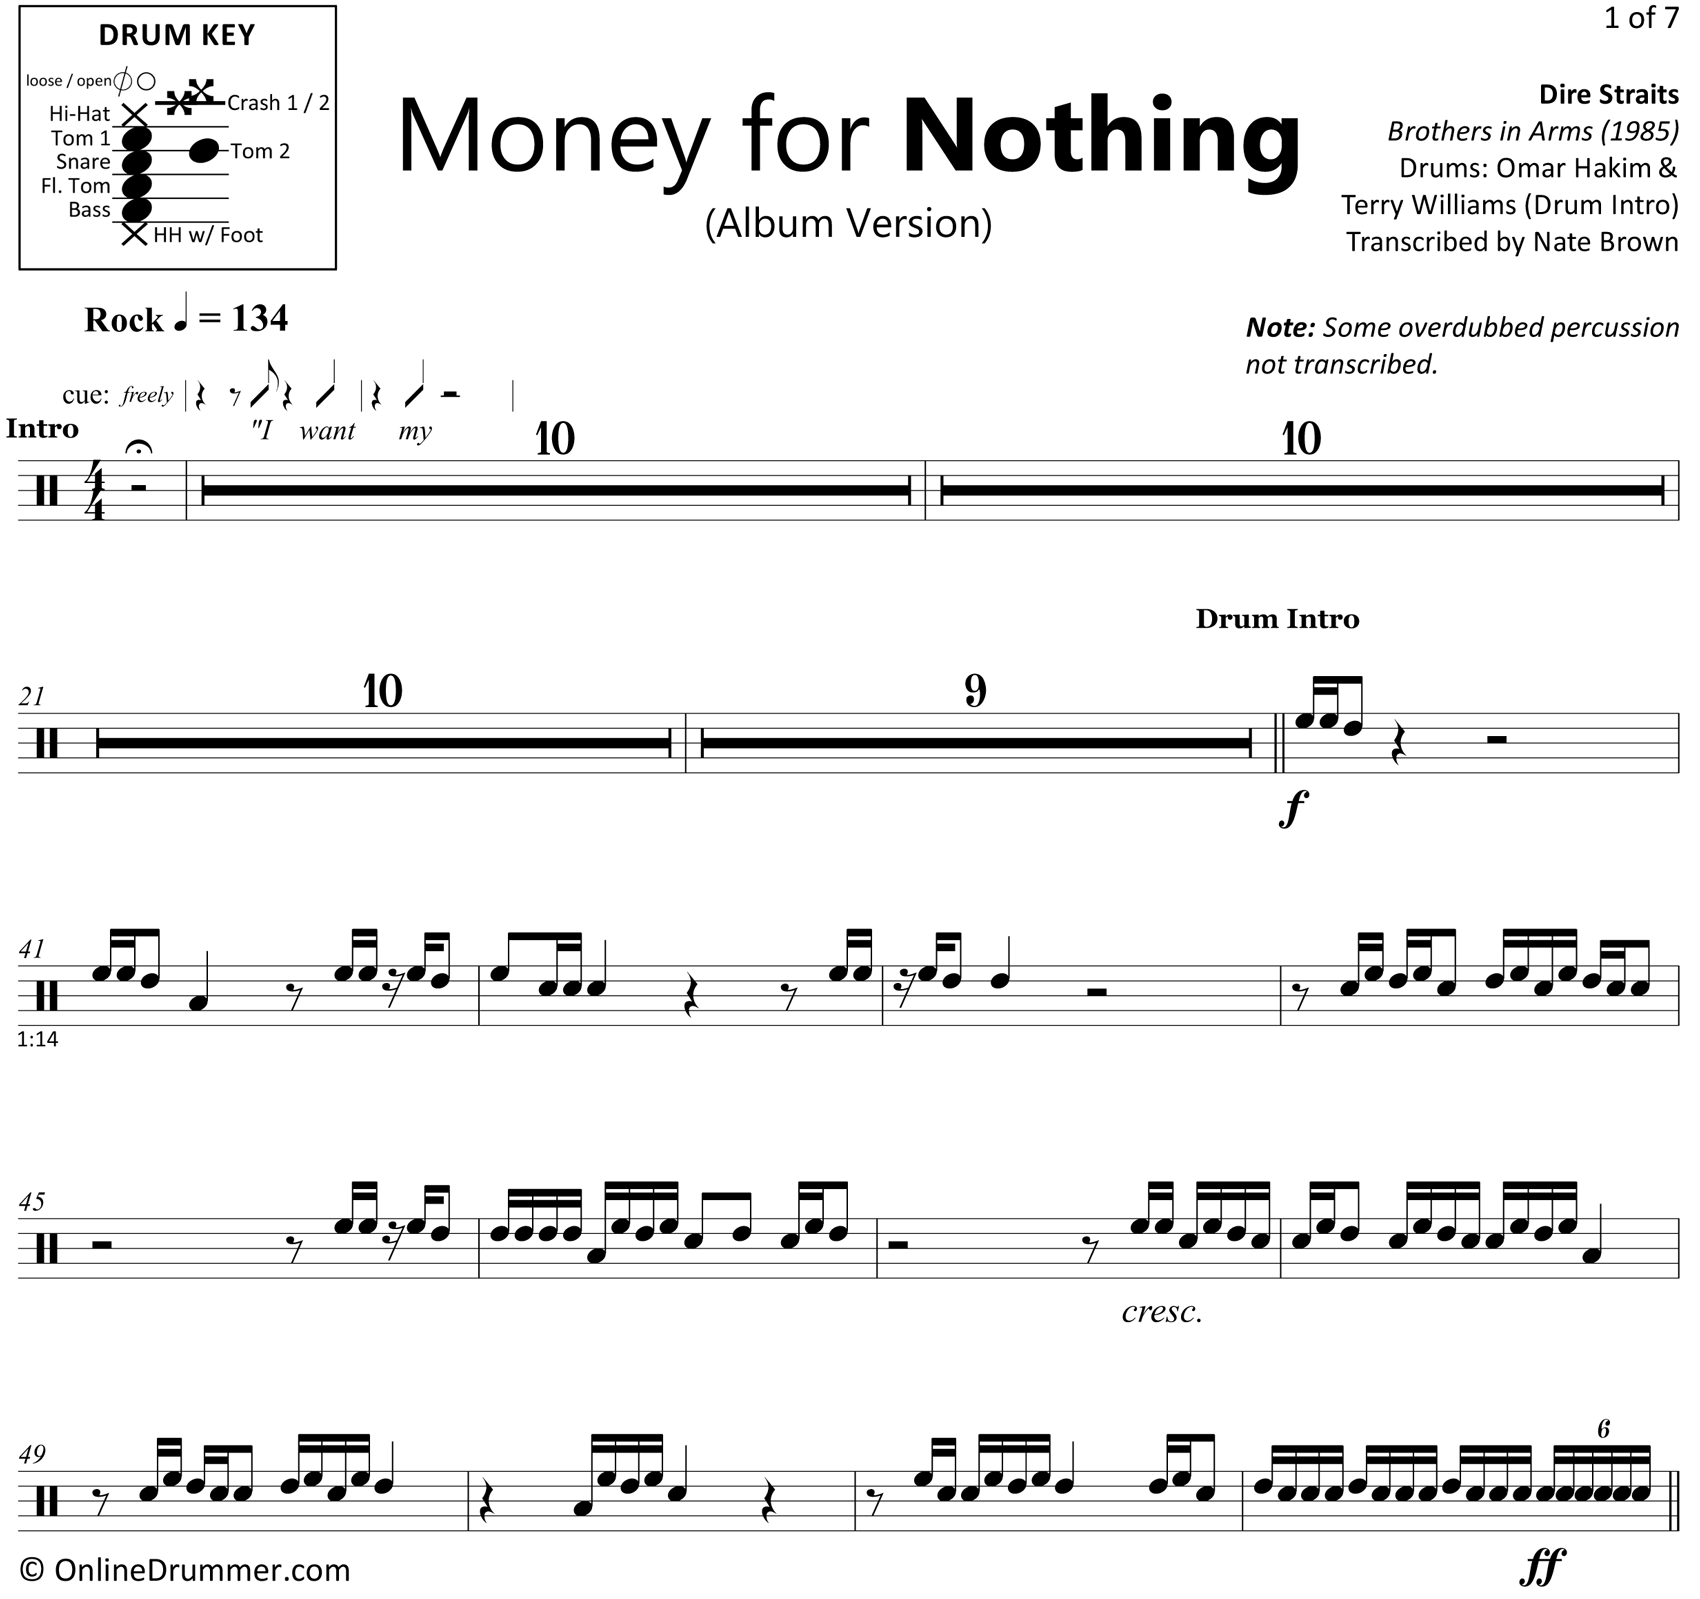 Money For Nothing - Dire Straits - Drum Sheet Music